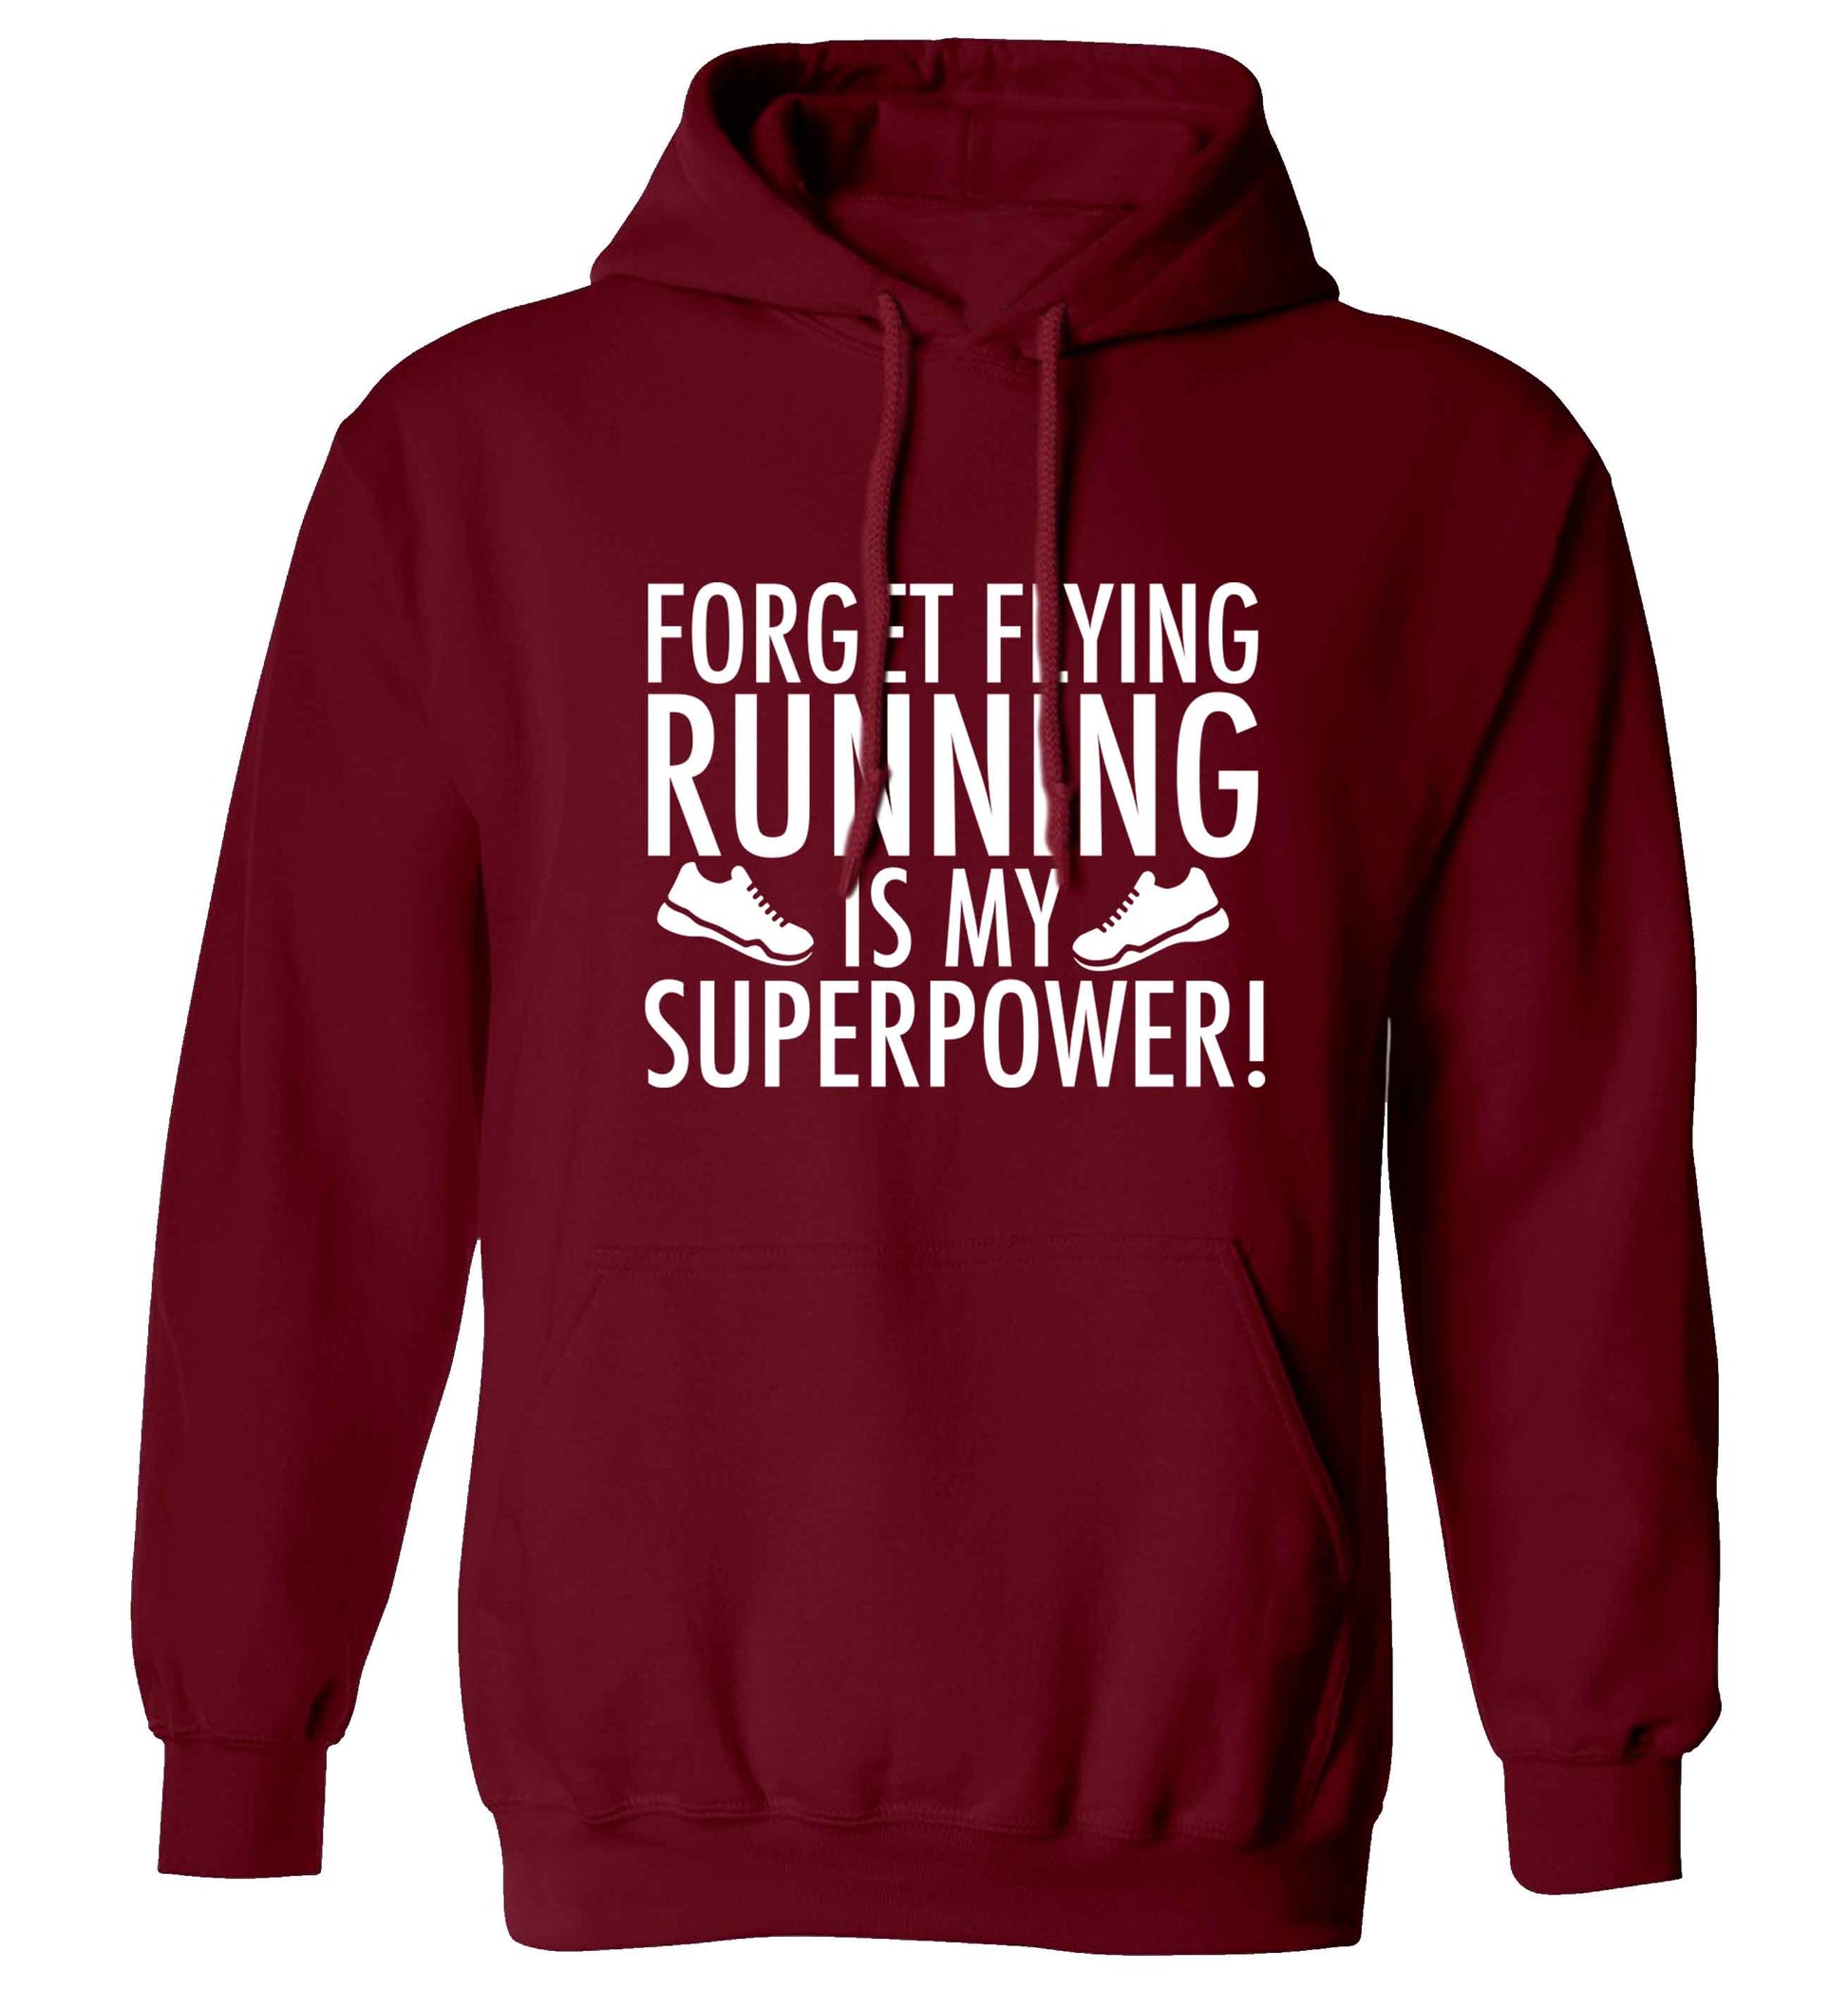 Forget flying running is my superpower adults unisex maroon hoodie 2XL